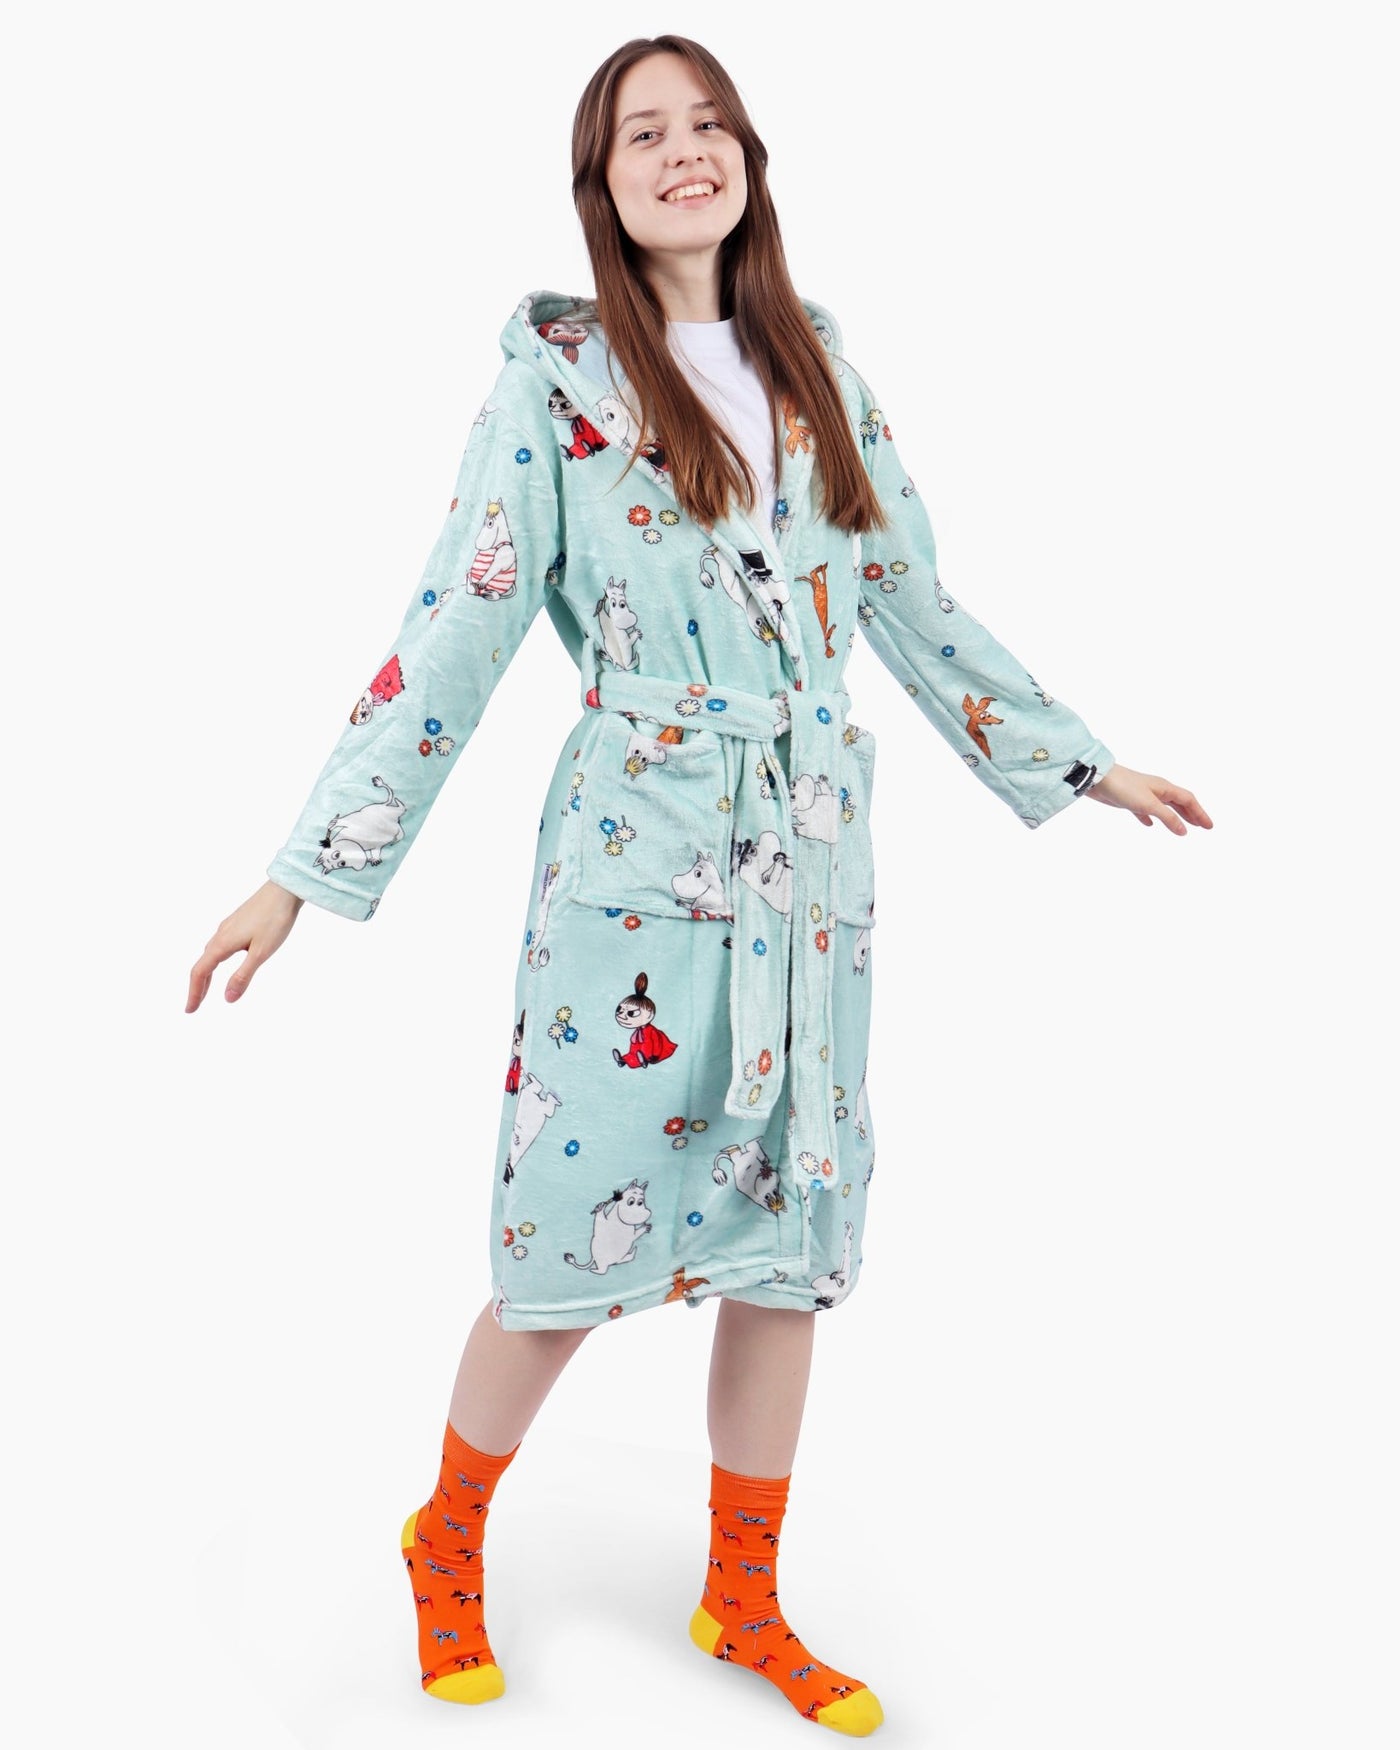 Mumindalen Dressing Gown - Cozee